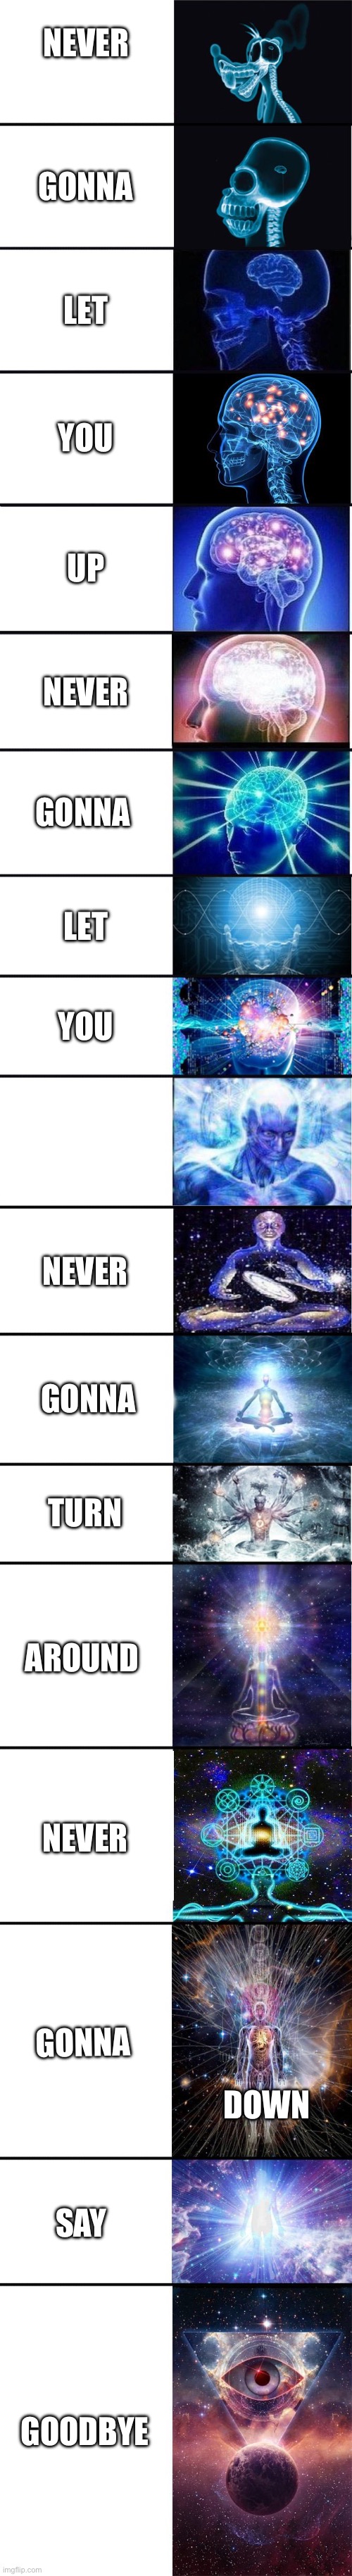 ;) click full image | NEVER; GONNA; LET; YOU; UP; NEVER; GONNA; LET; YOU; NEVER; GONNA; TURN; AROUND; NEVER; GONNA; DOWN; SAY; GOODBYE | image tagged in expanding brain 9001,rickroll | made w/ Imgflip meme maker